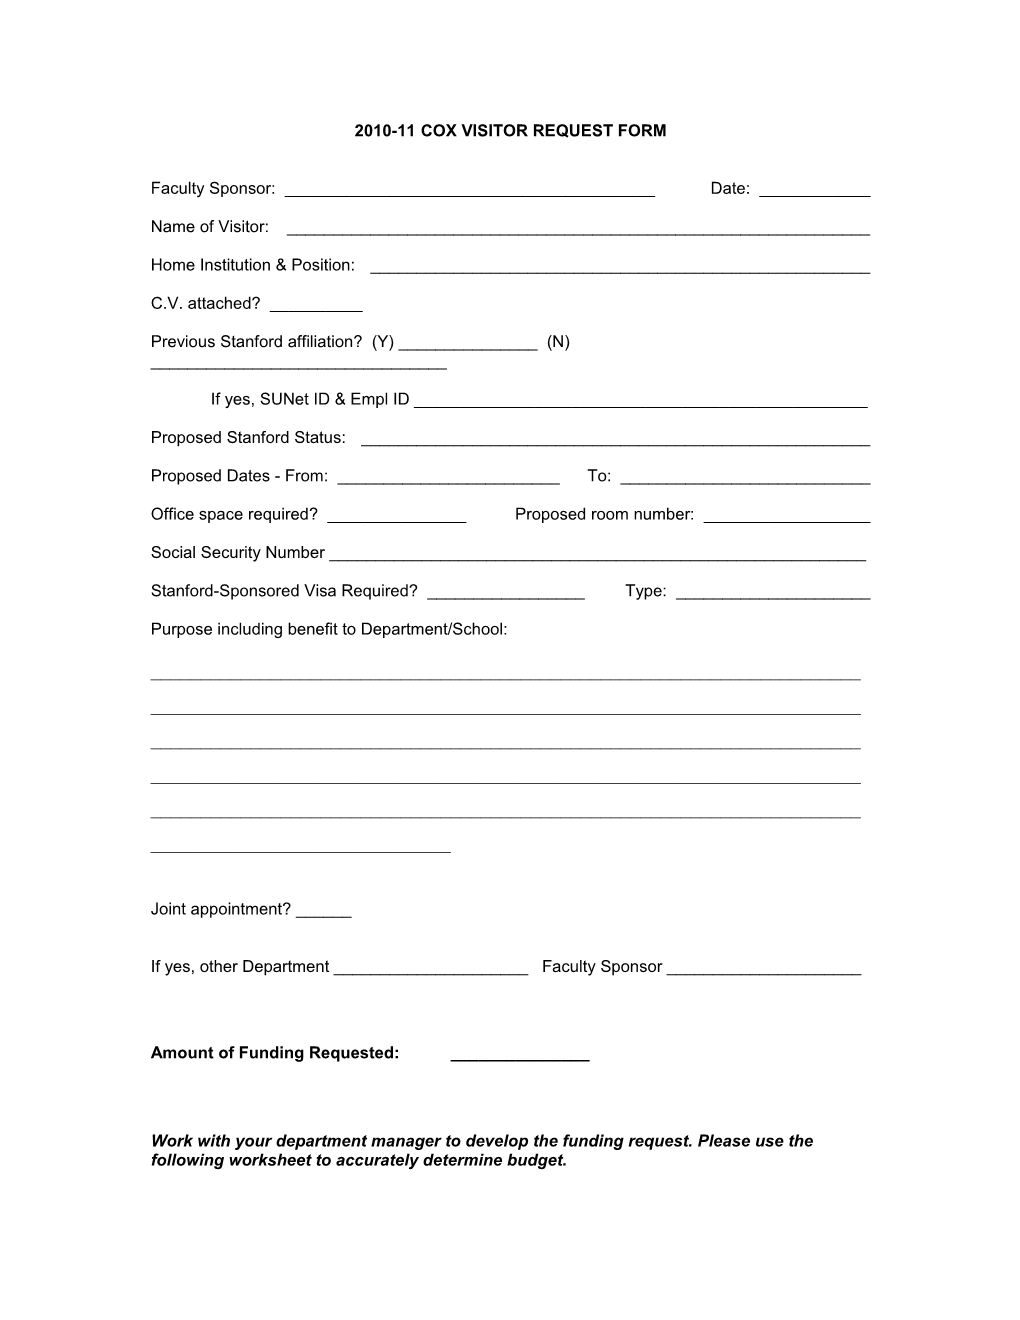 2010-11 Cox Visitor Request Form